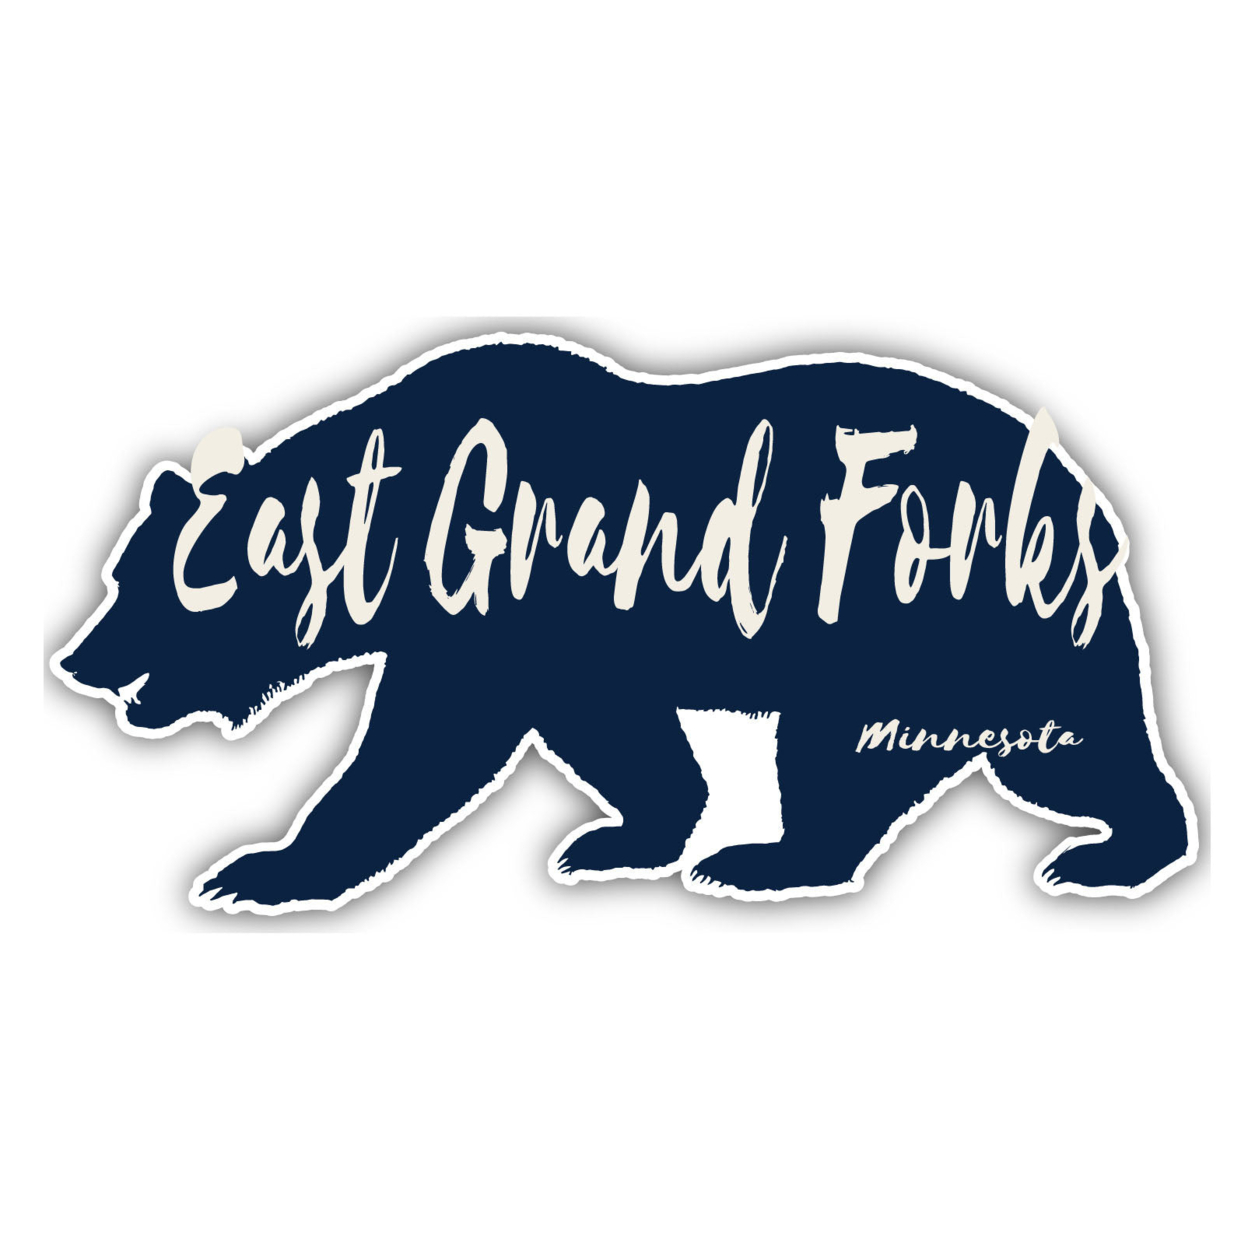 East Grand Forks Minnesota Souvenir Decorative Stickers (Choose Theme And Size) - 4-Pack, 4-Inch, Camp Life